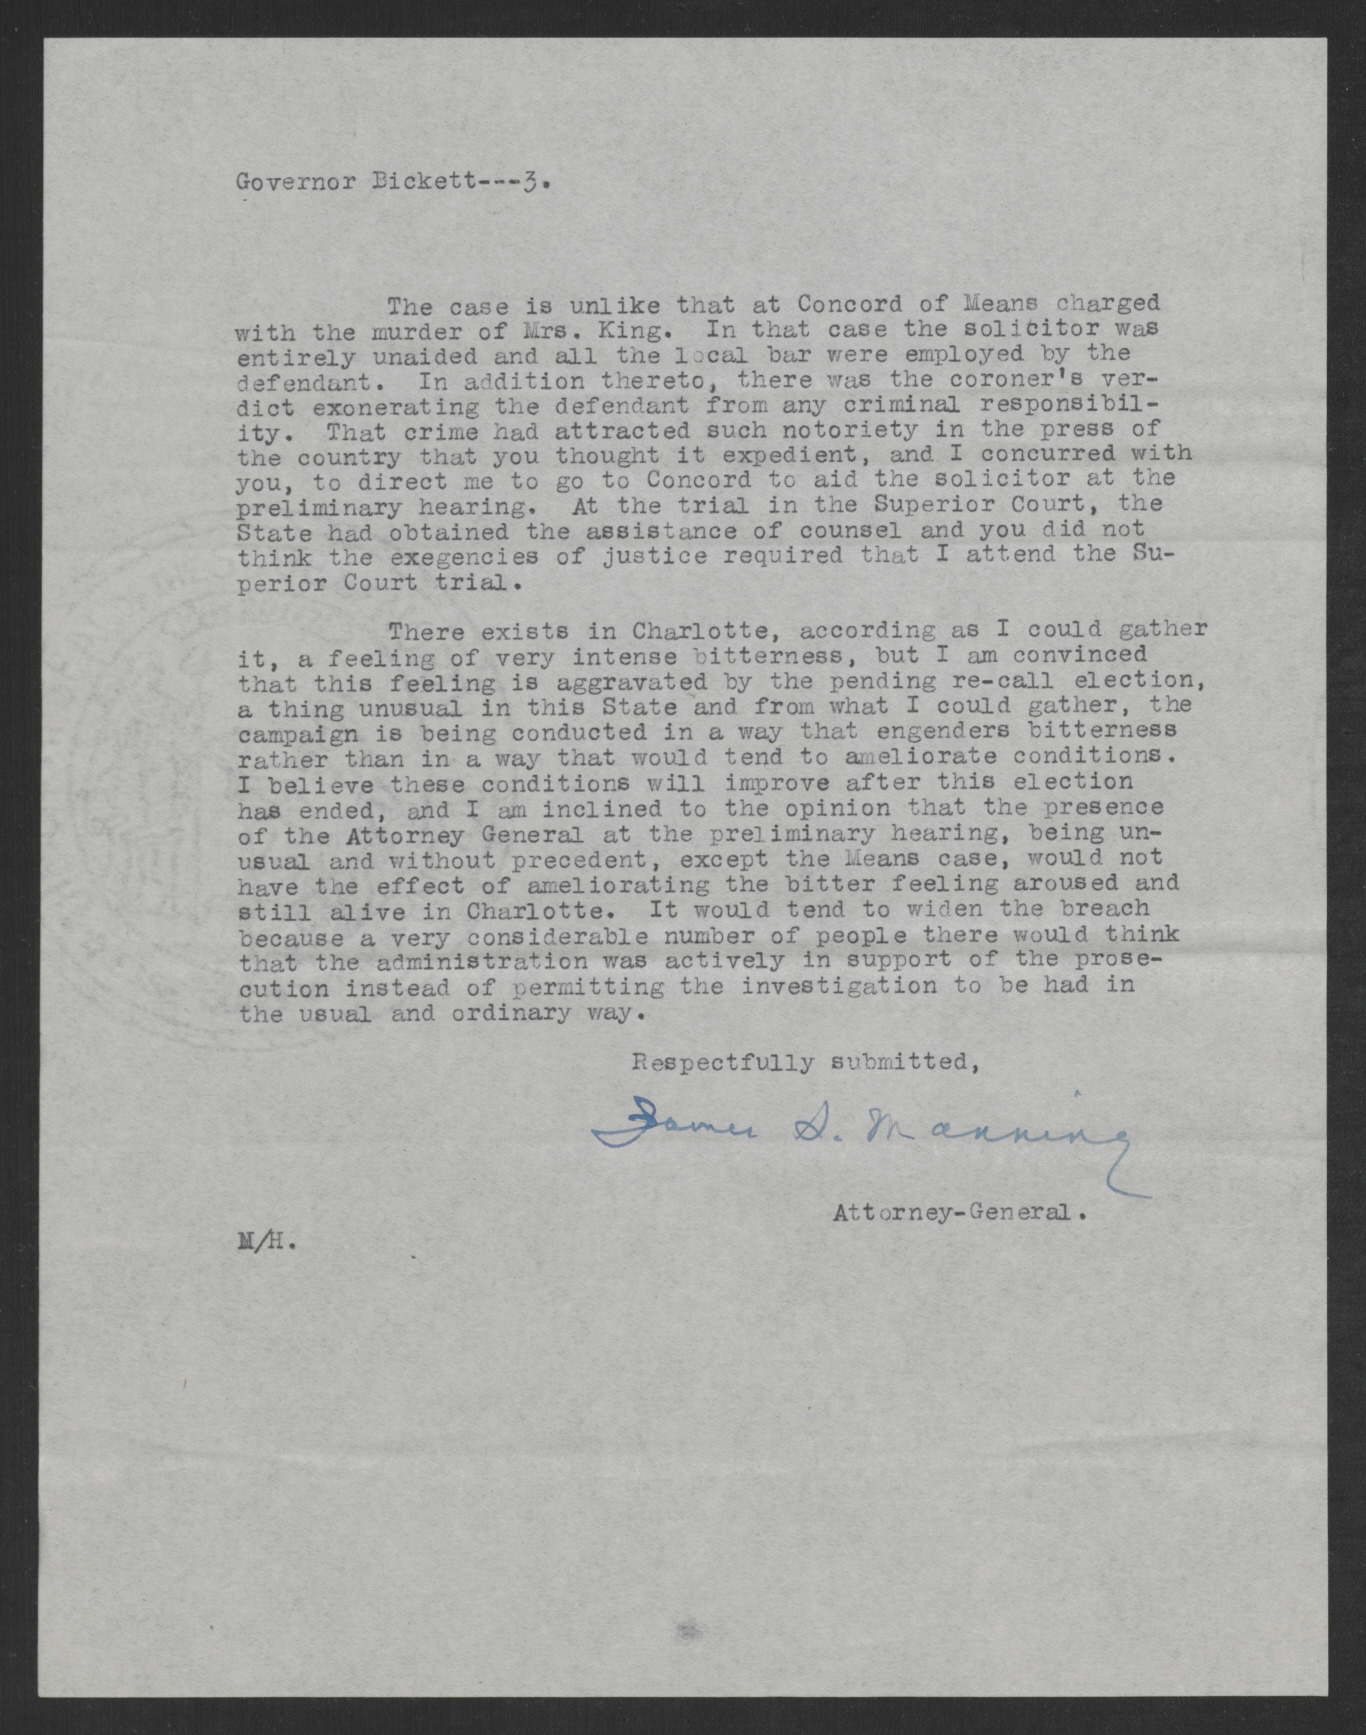 Letter from James S. Manning to Thomas W. Bickett, October 16, 1919, page 3